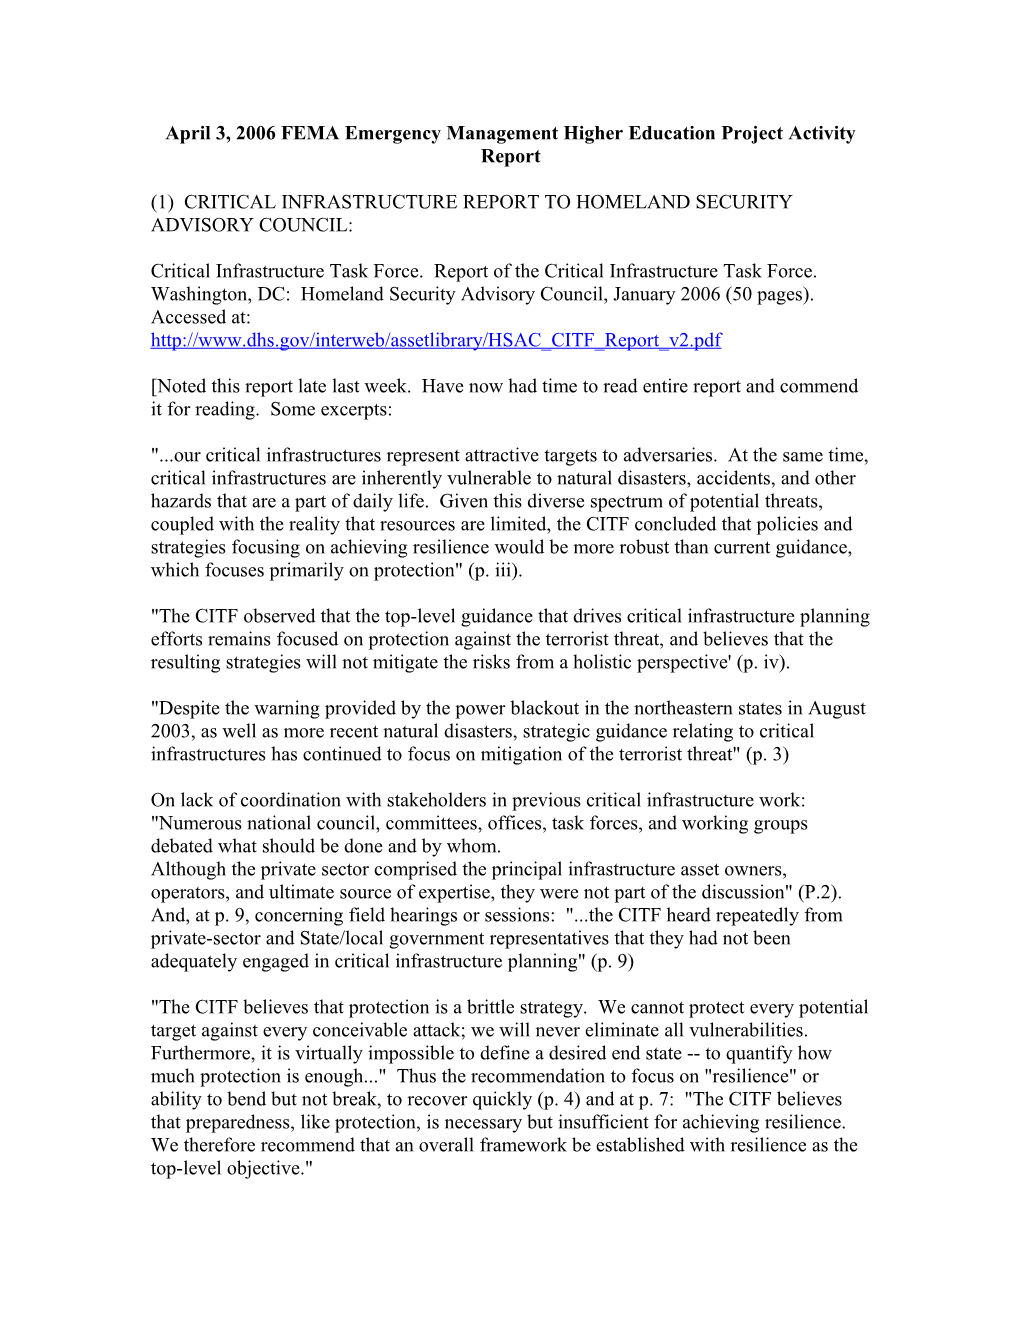 April 3, 2006 FEMA Emergency Management Higher Education Project Activity Report